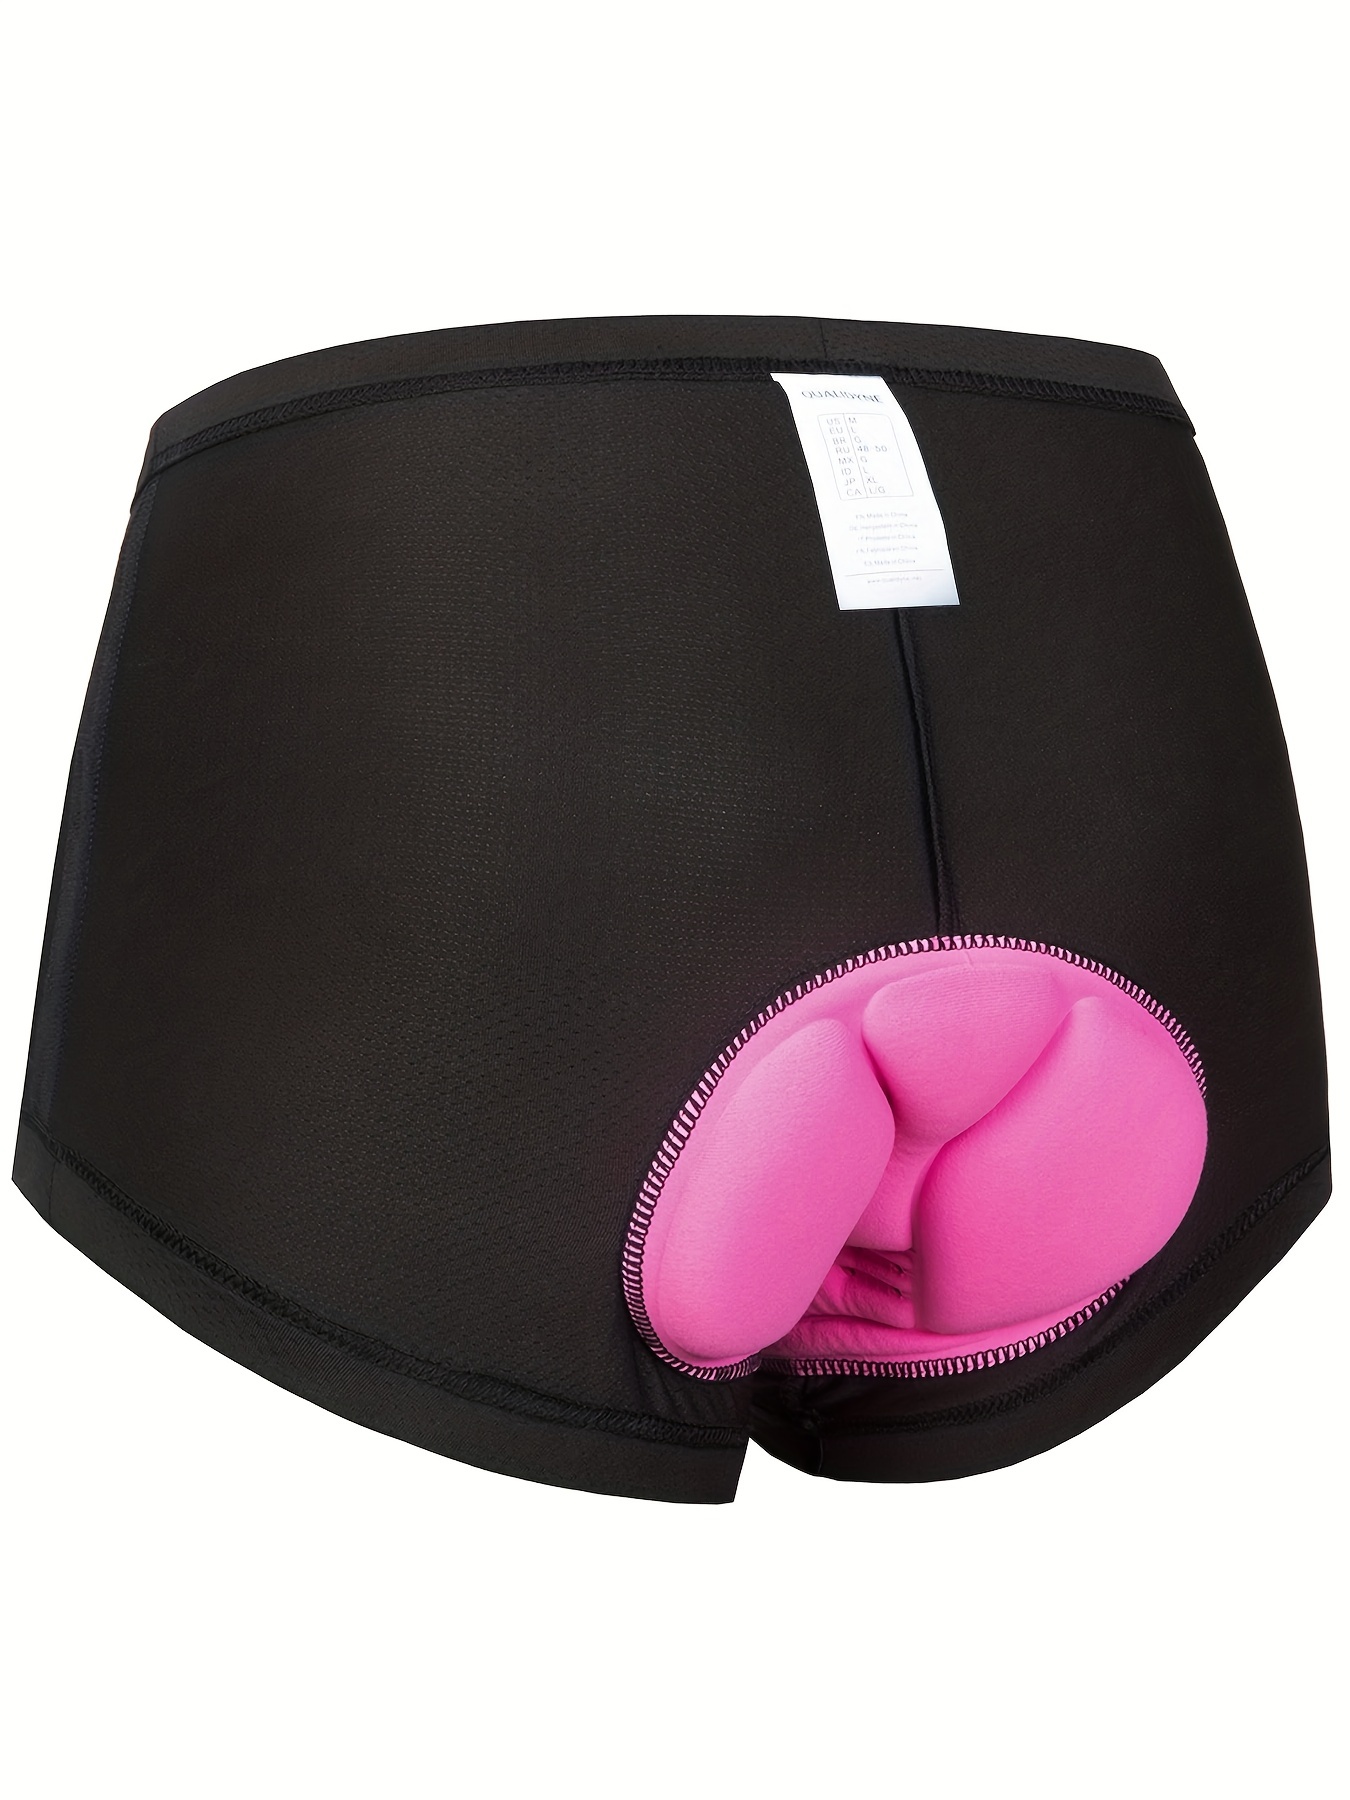 Sponeed Cycling Underwear Shorts for Women 4D Gel Padded Bike Bicycle  Undershorts Pink S 